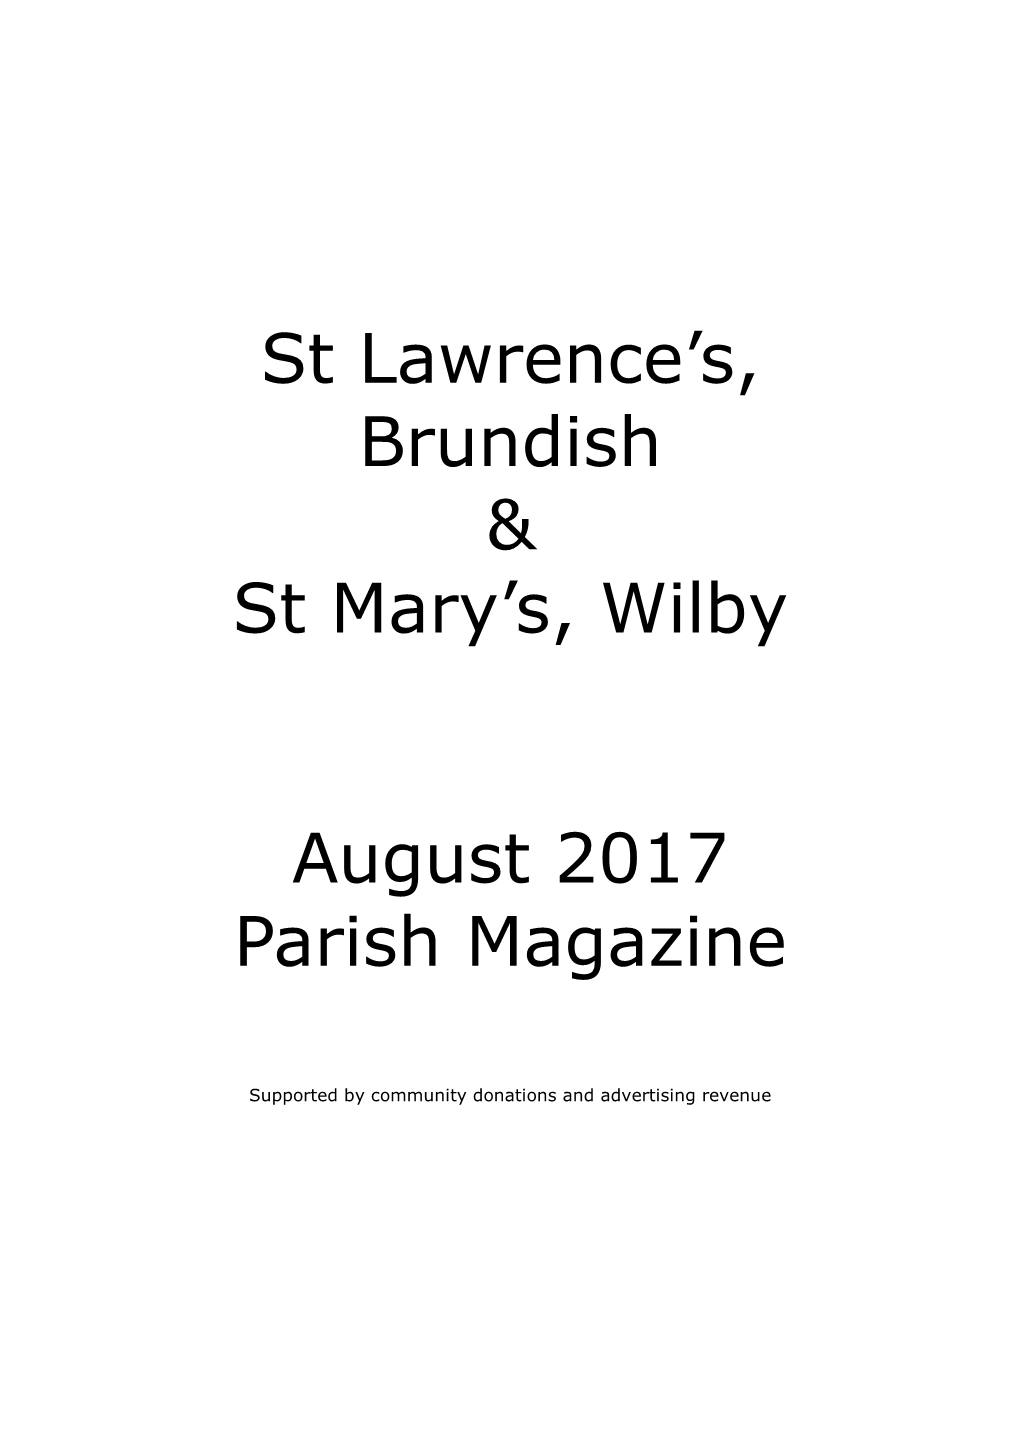 St Lawrence's, Brundish & St Mary's, Wilby August 2017 Parish Magazine